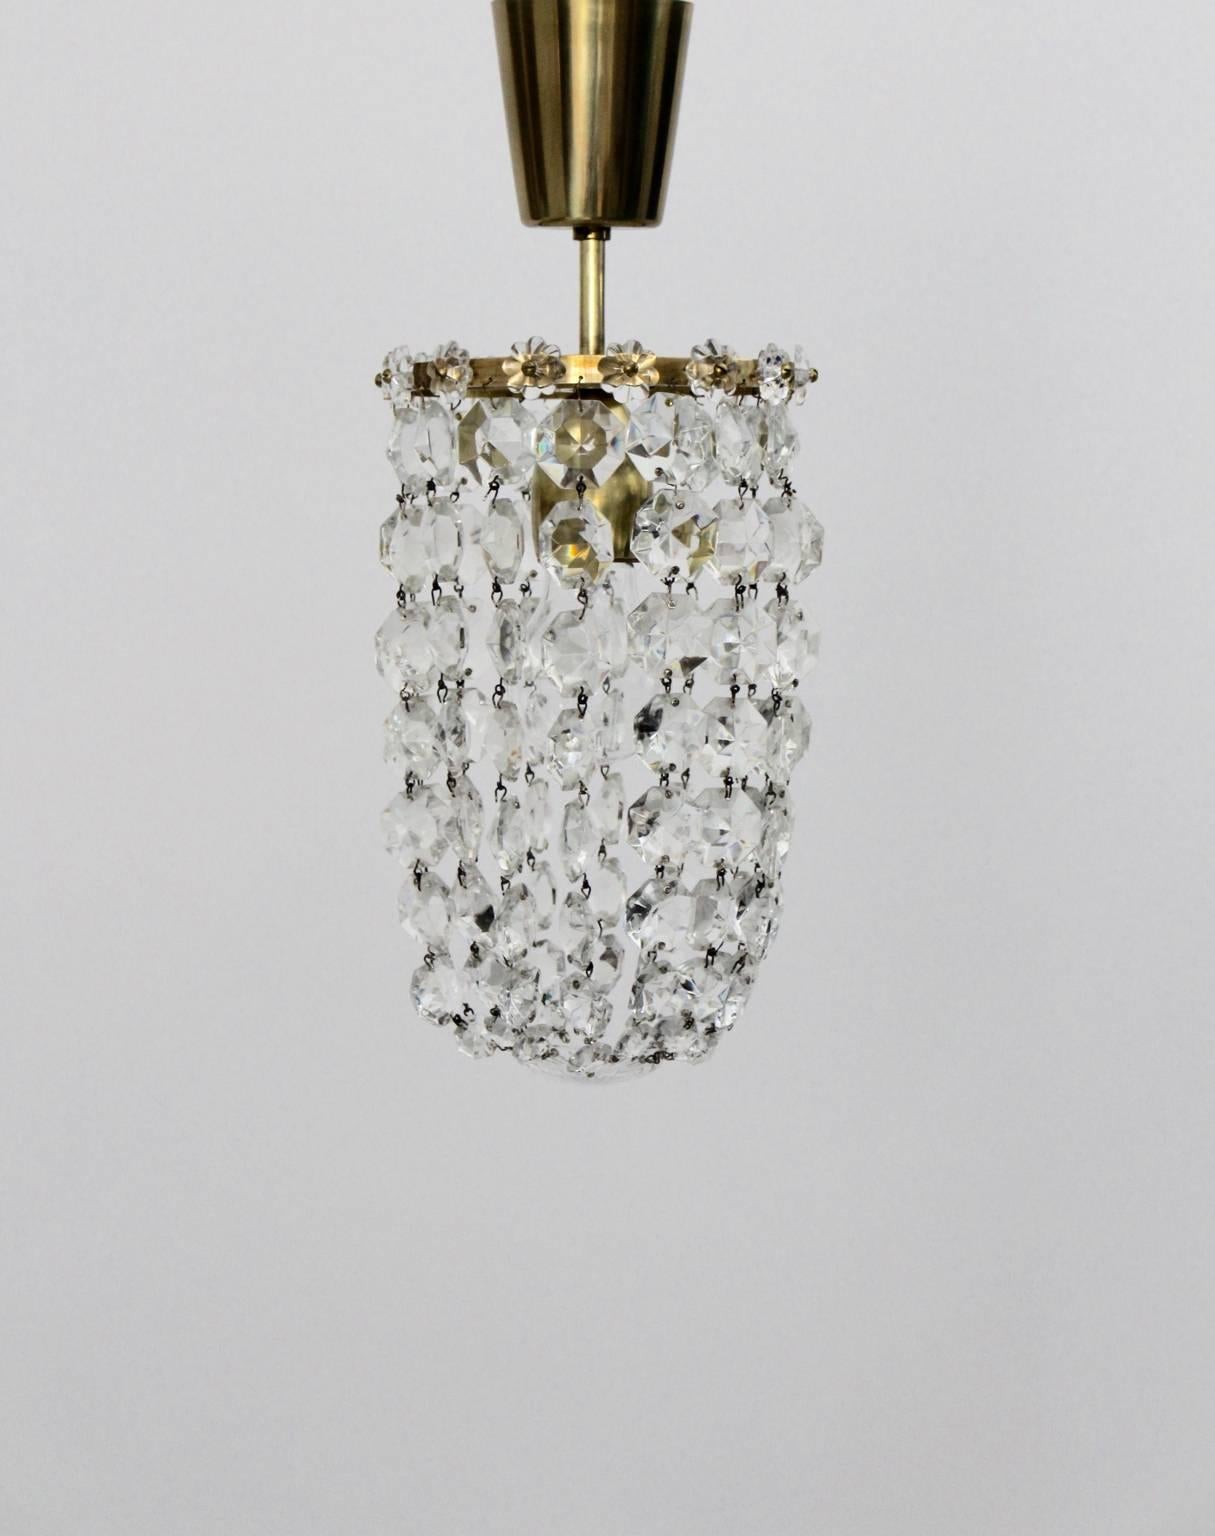 Brass Mid Century Modern Crystal Glass Chandelier by Bakalowits & Soehne Vienna, 1950s For Sale